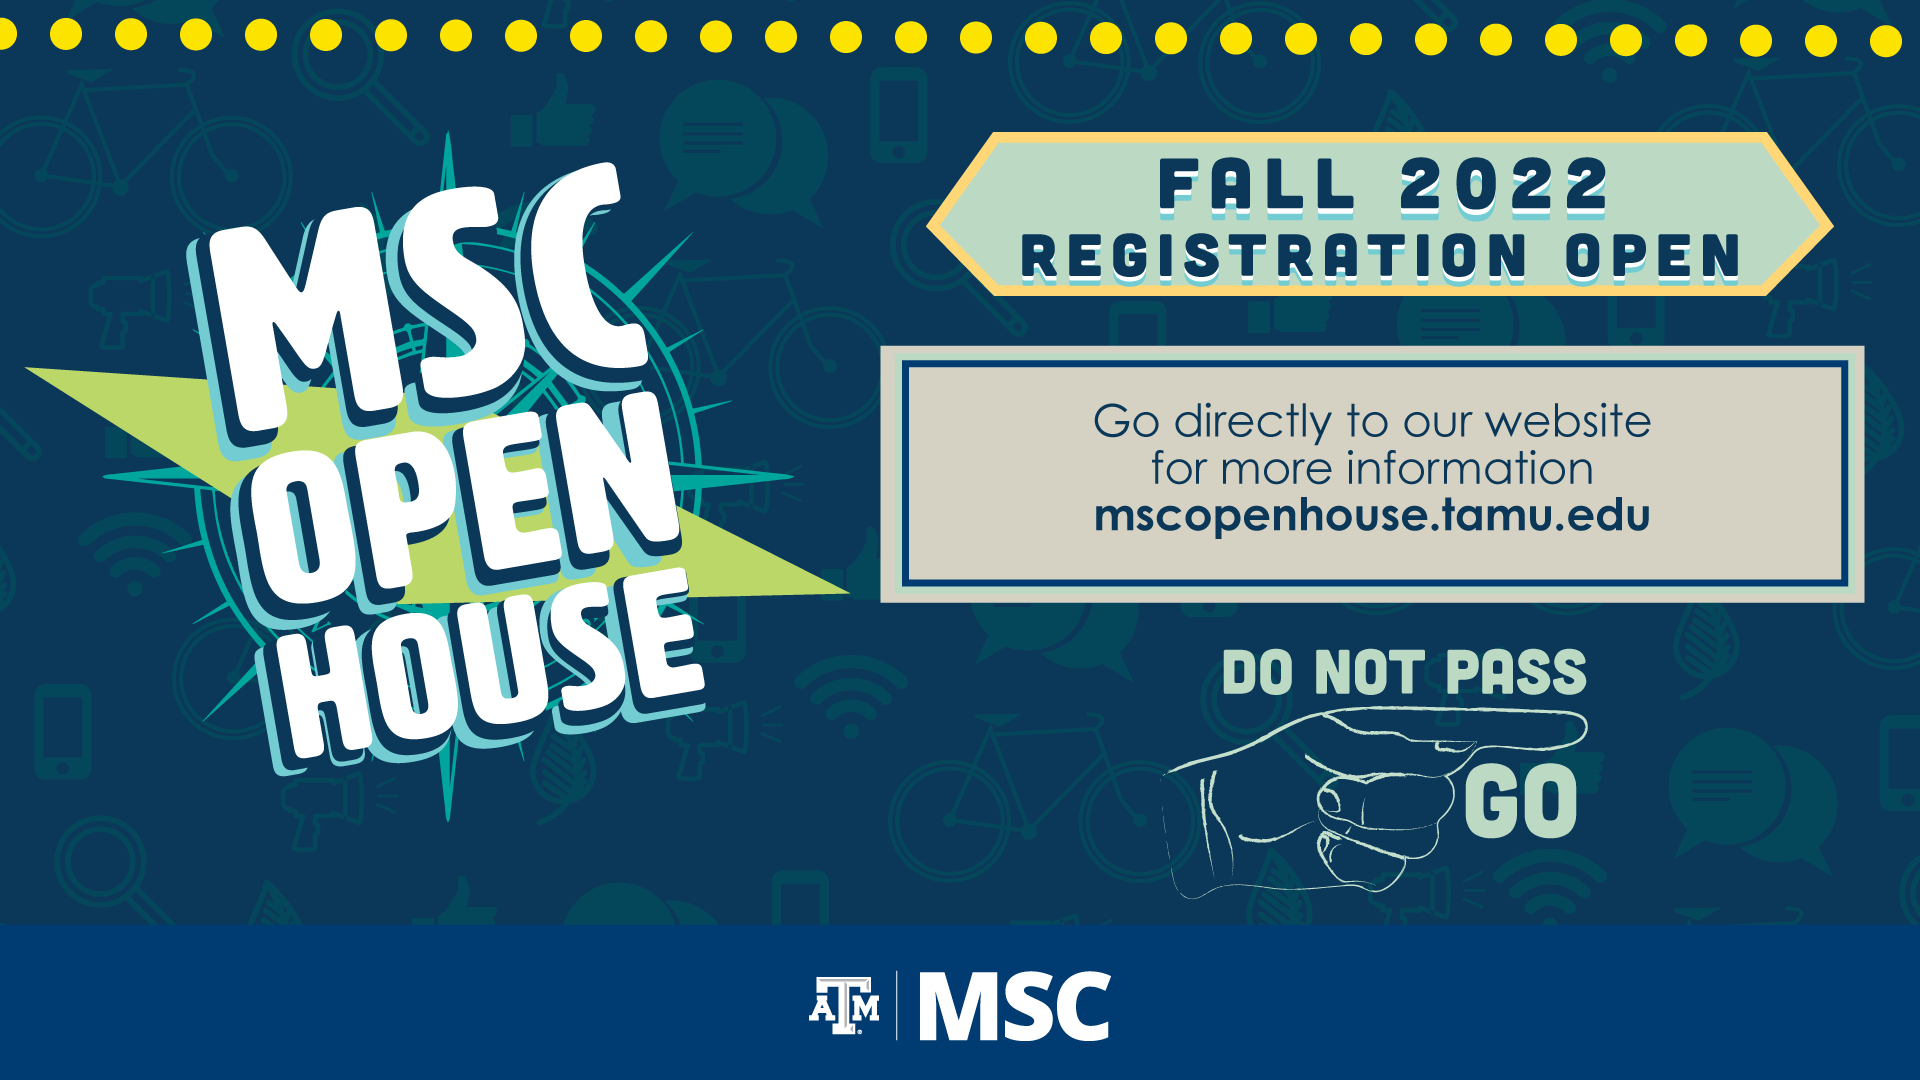 MSC Open House Fall 2022 Registration Open, Go directly to our website for more information; mscopenhouse.tamu.edu